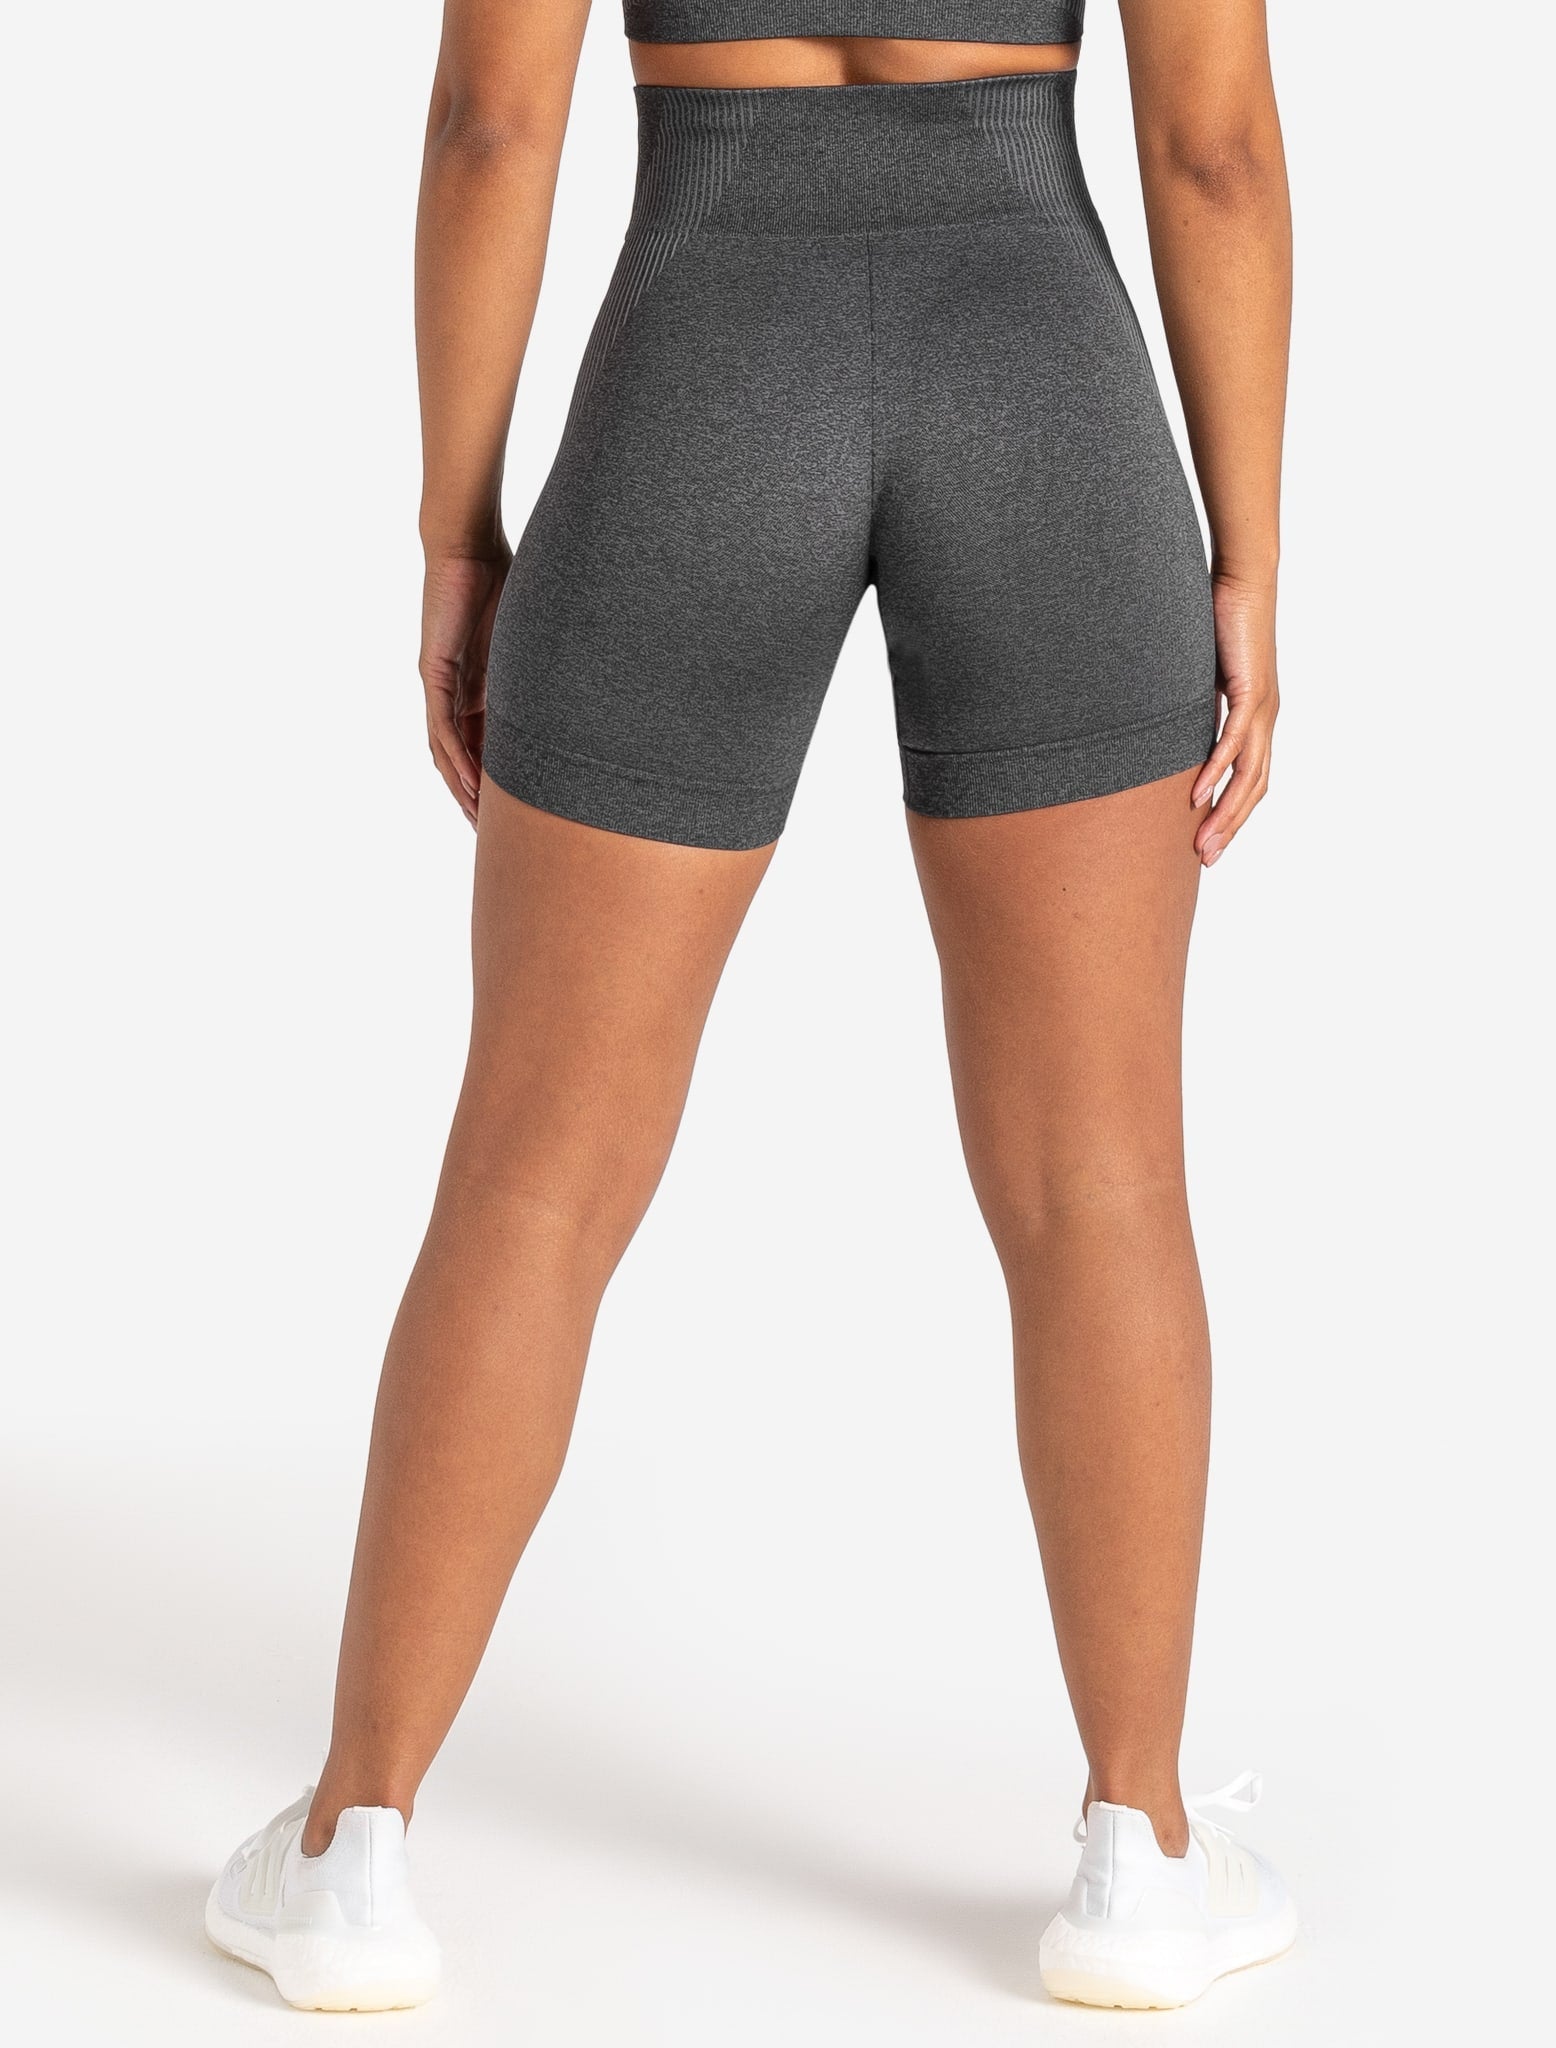 ADAPT 2.0 Seamless Shorts - Charcoal Pursue Fitness 2